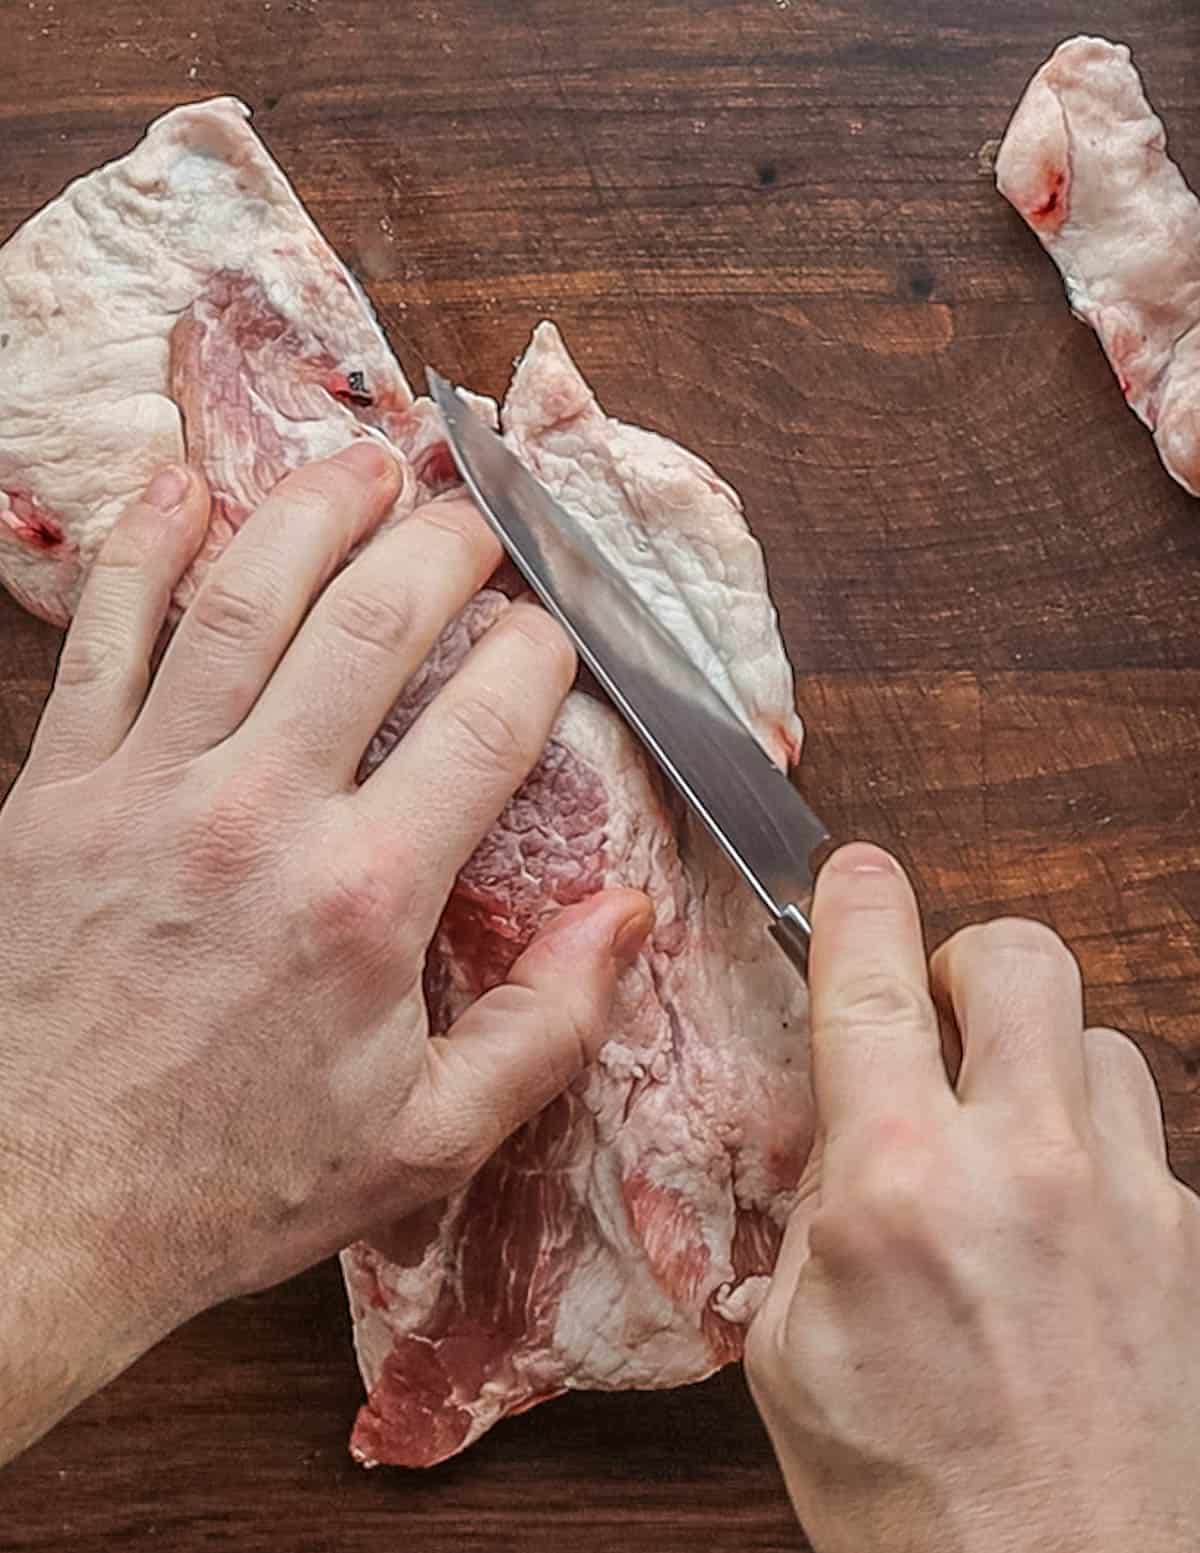 Trimming excess fat from a pork brisket. 